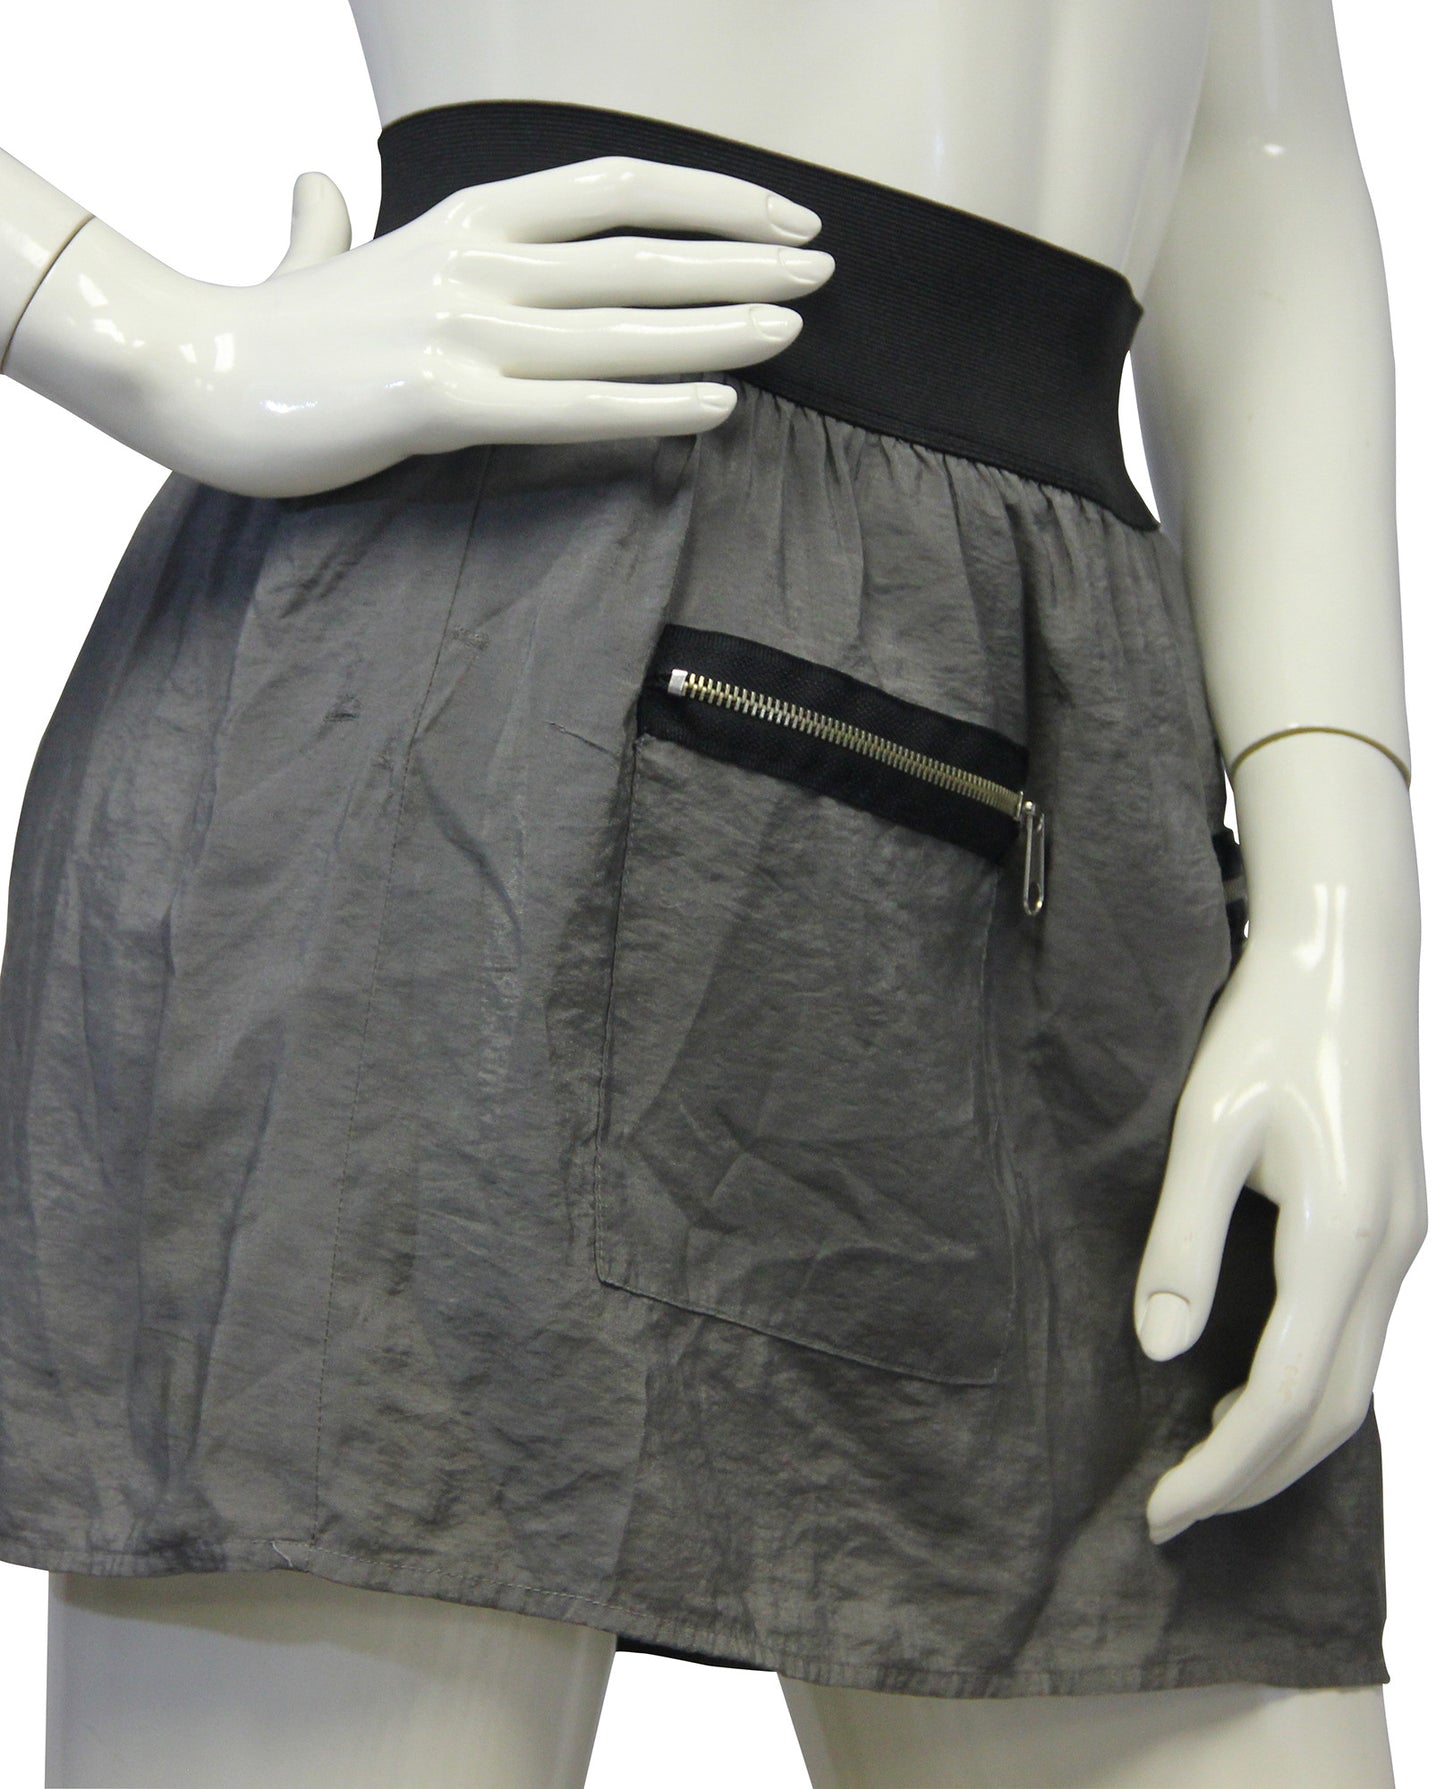 Load image into Gallery viewer, Steve Madden Gray Mini Skirt Size SM - Designers On A Dime - 2
